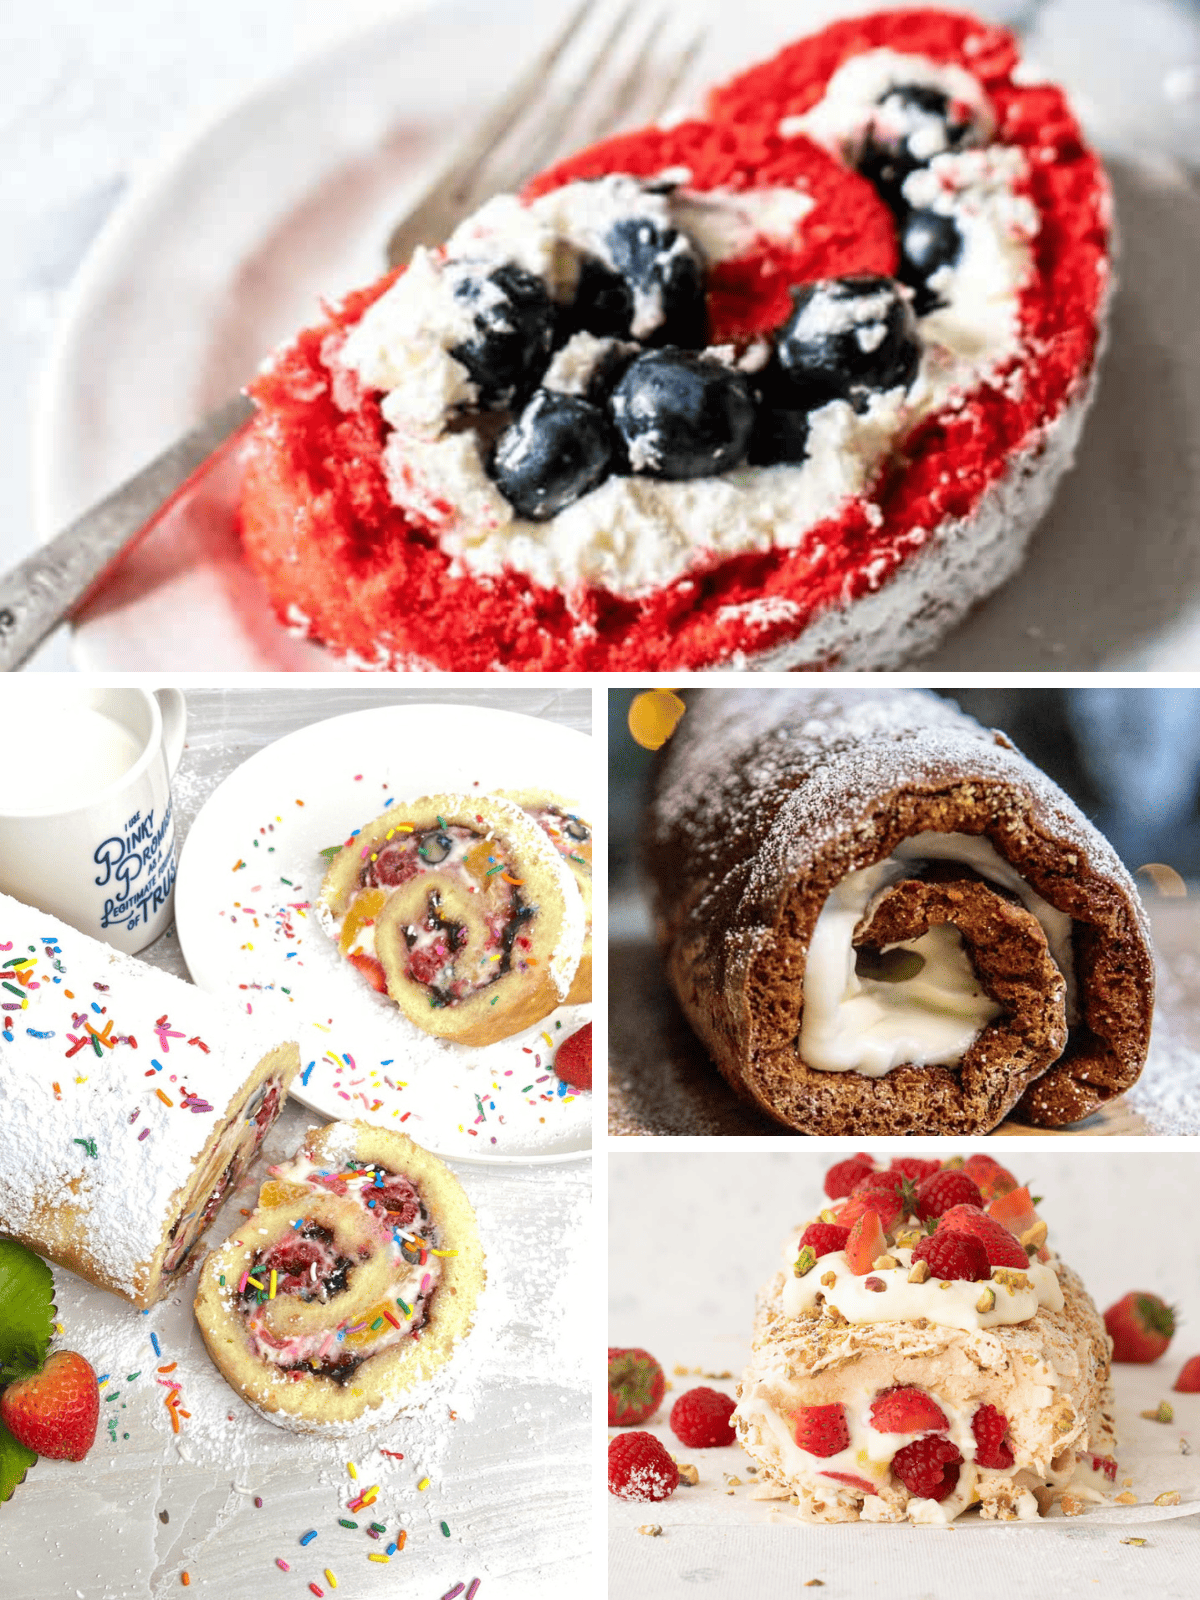 Our Best Roll Cake Recipes + Fruit-Filled Rainbow Roll Cake